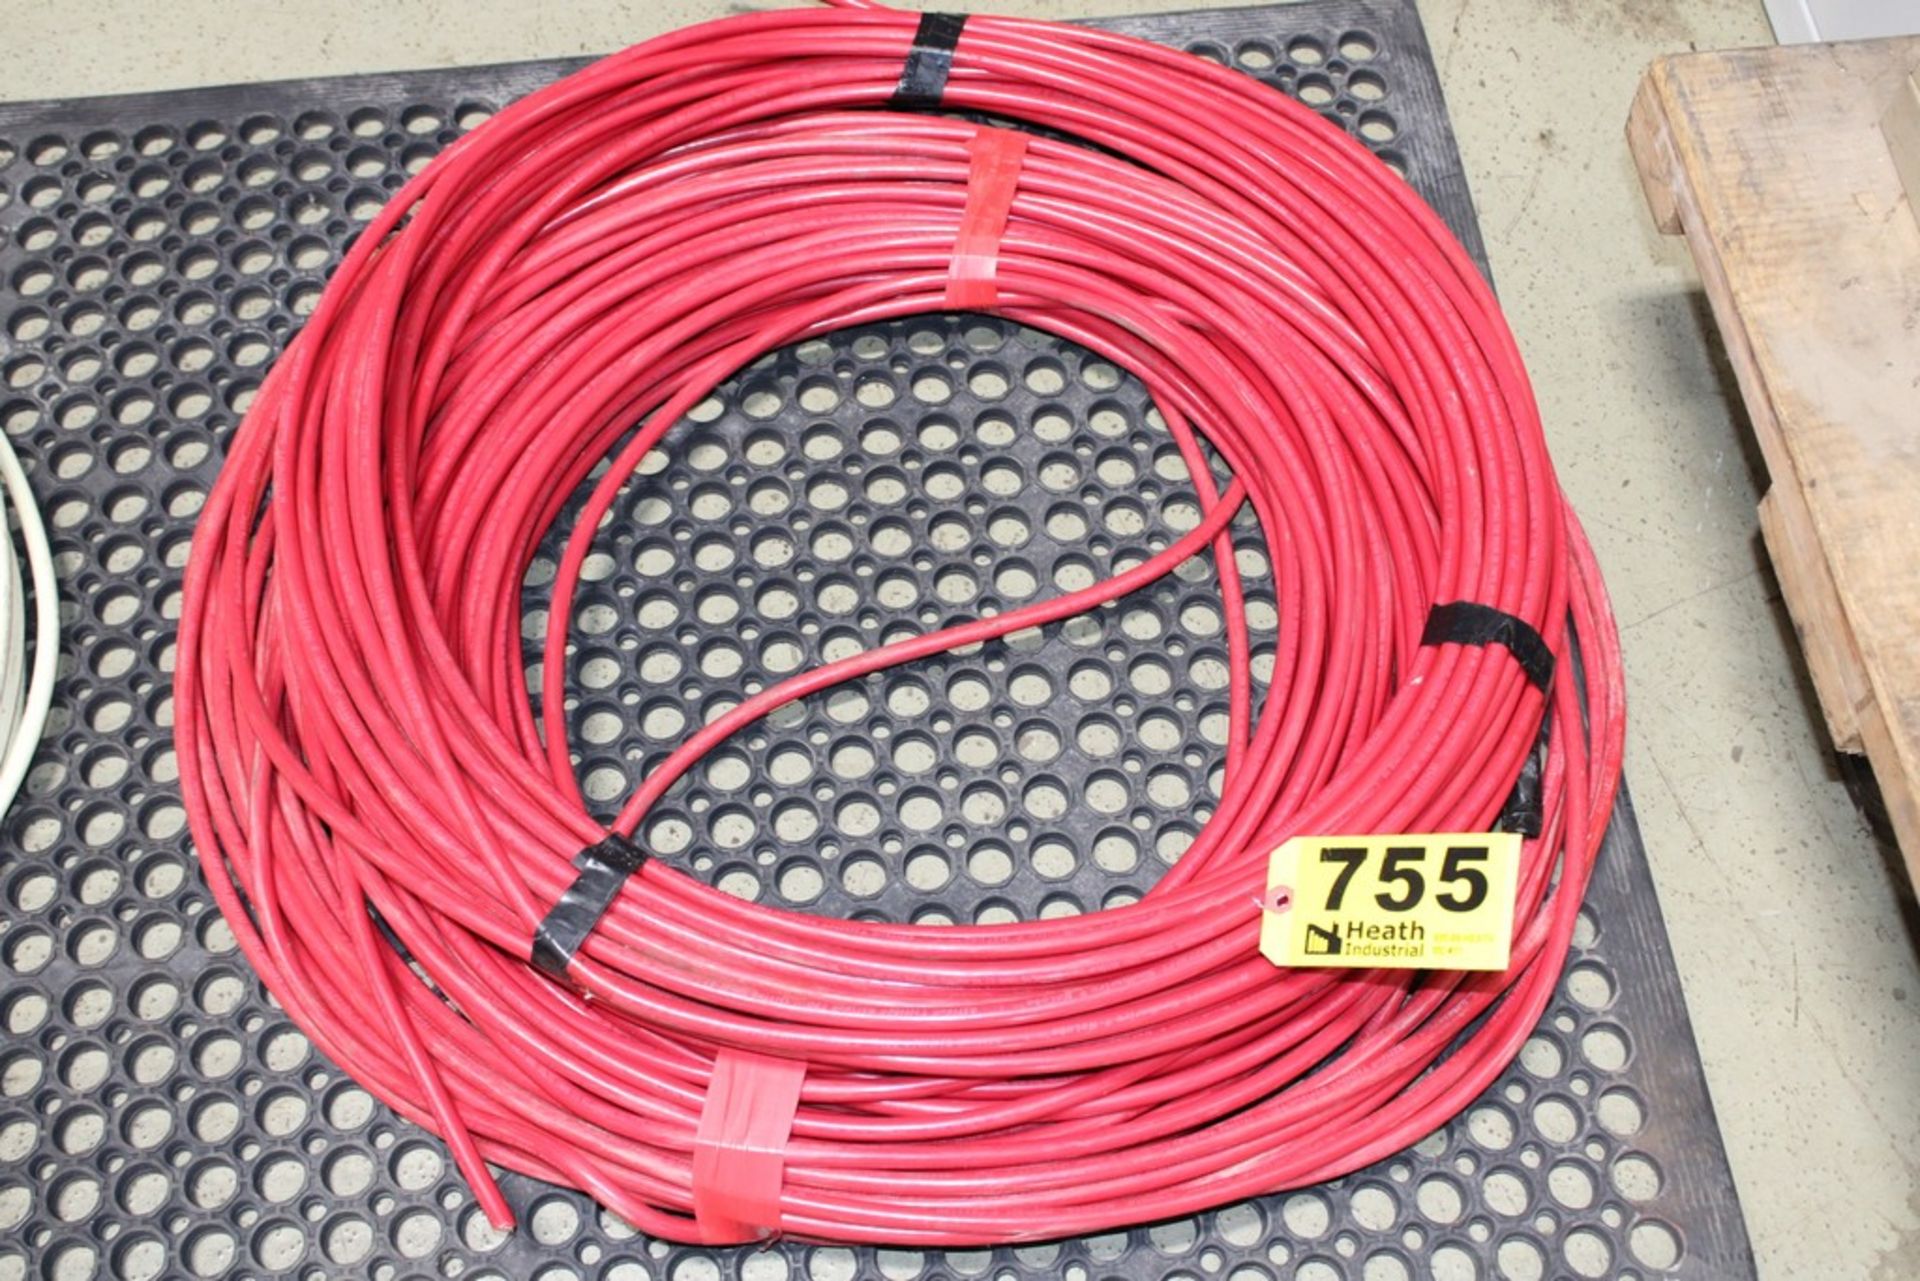 (2) WIRE CABLES ON FLOOR, 1 AWG (RED)